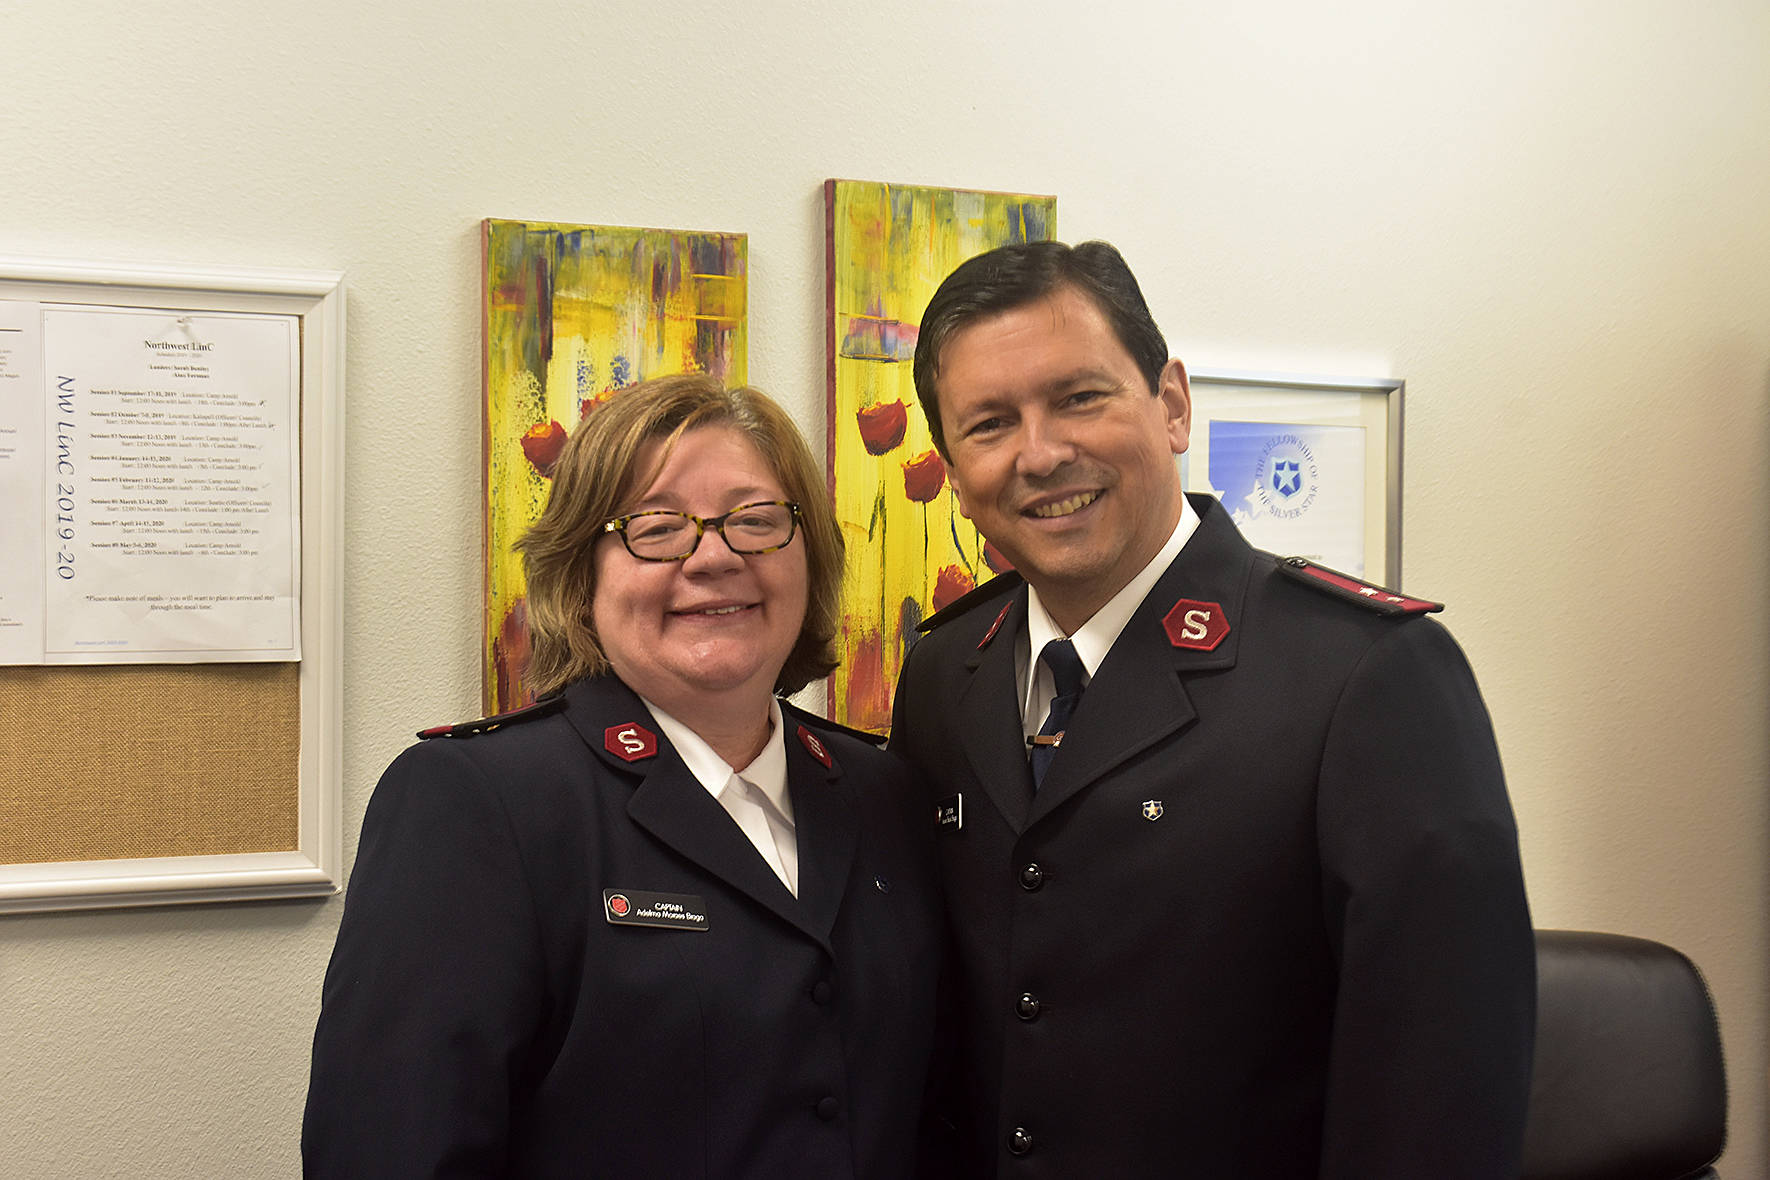 Photo by Haley Ausbun. Captains Adelma Braga and Isaias Braga were appointed to lead the Renton Salvation Army in June 2019.